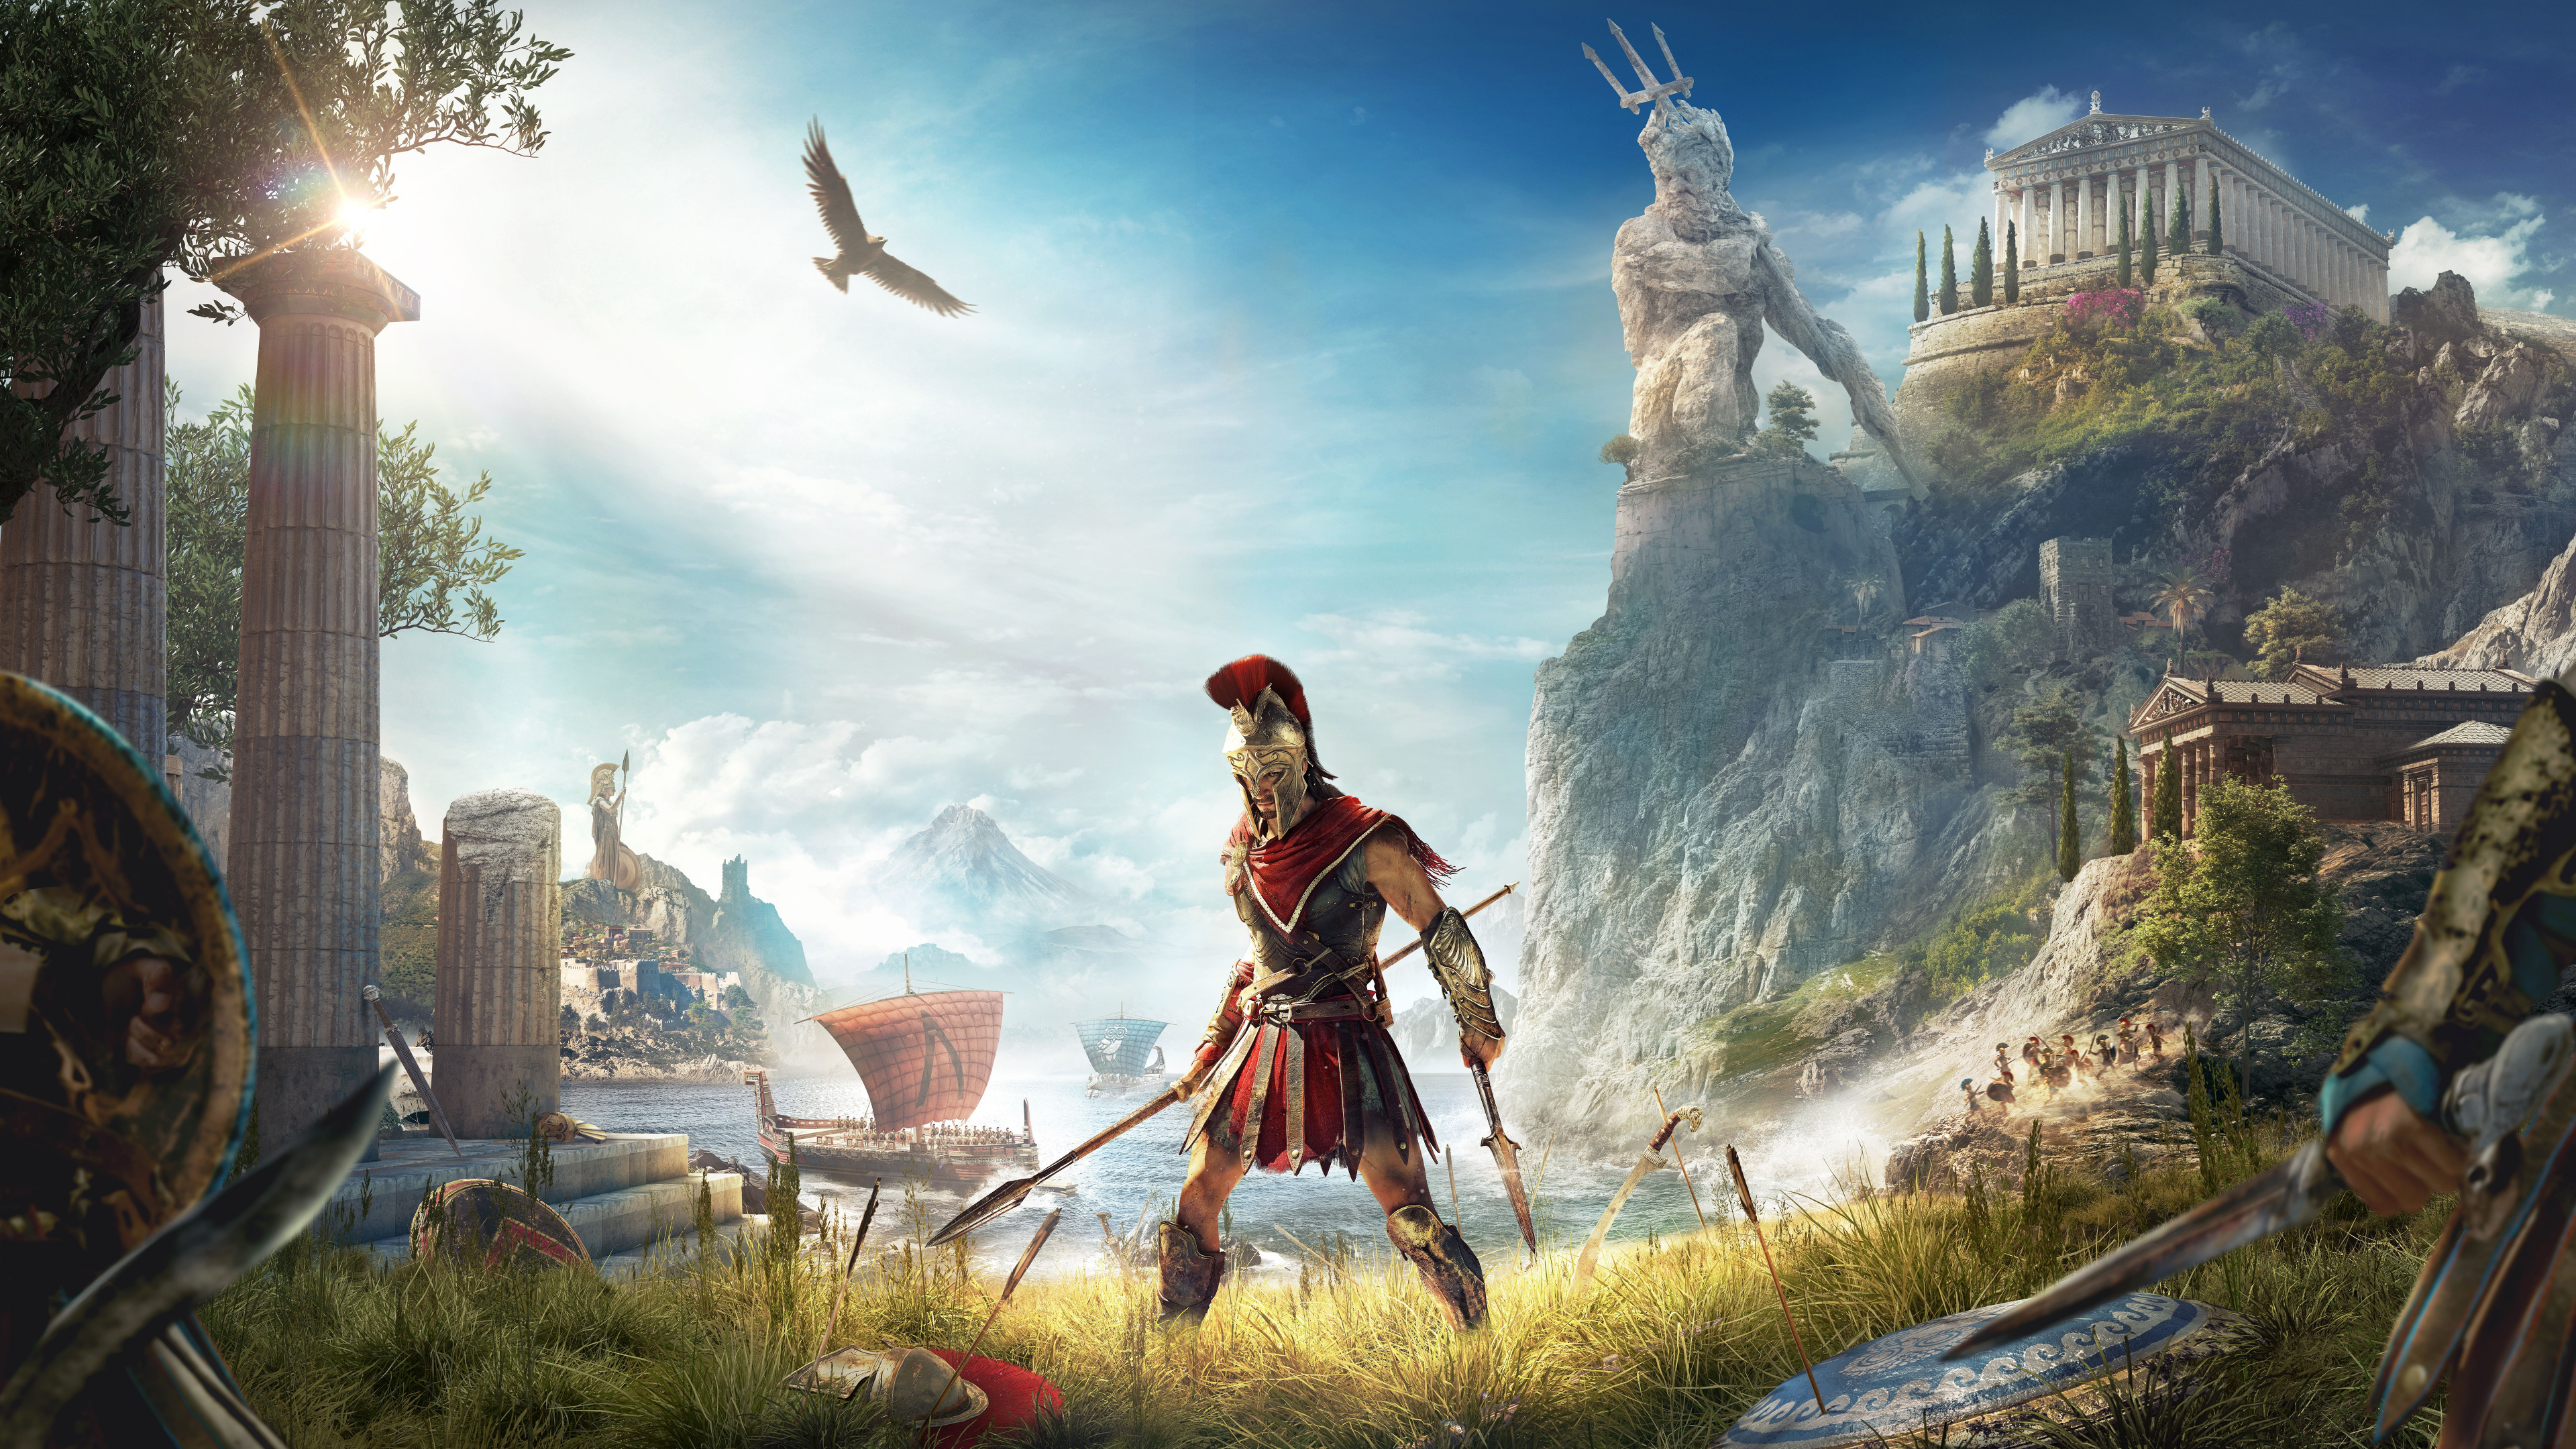 Assassins Creed Odyssey, Ubisoft, pc Game, Games, Mythology. Wallpaper in 3840x2160 Resolution